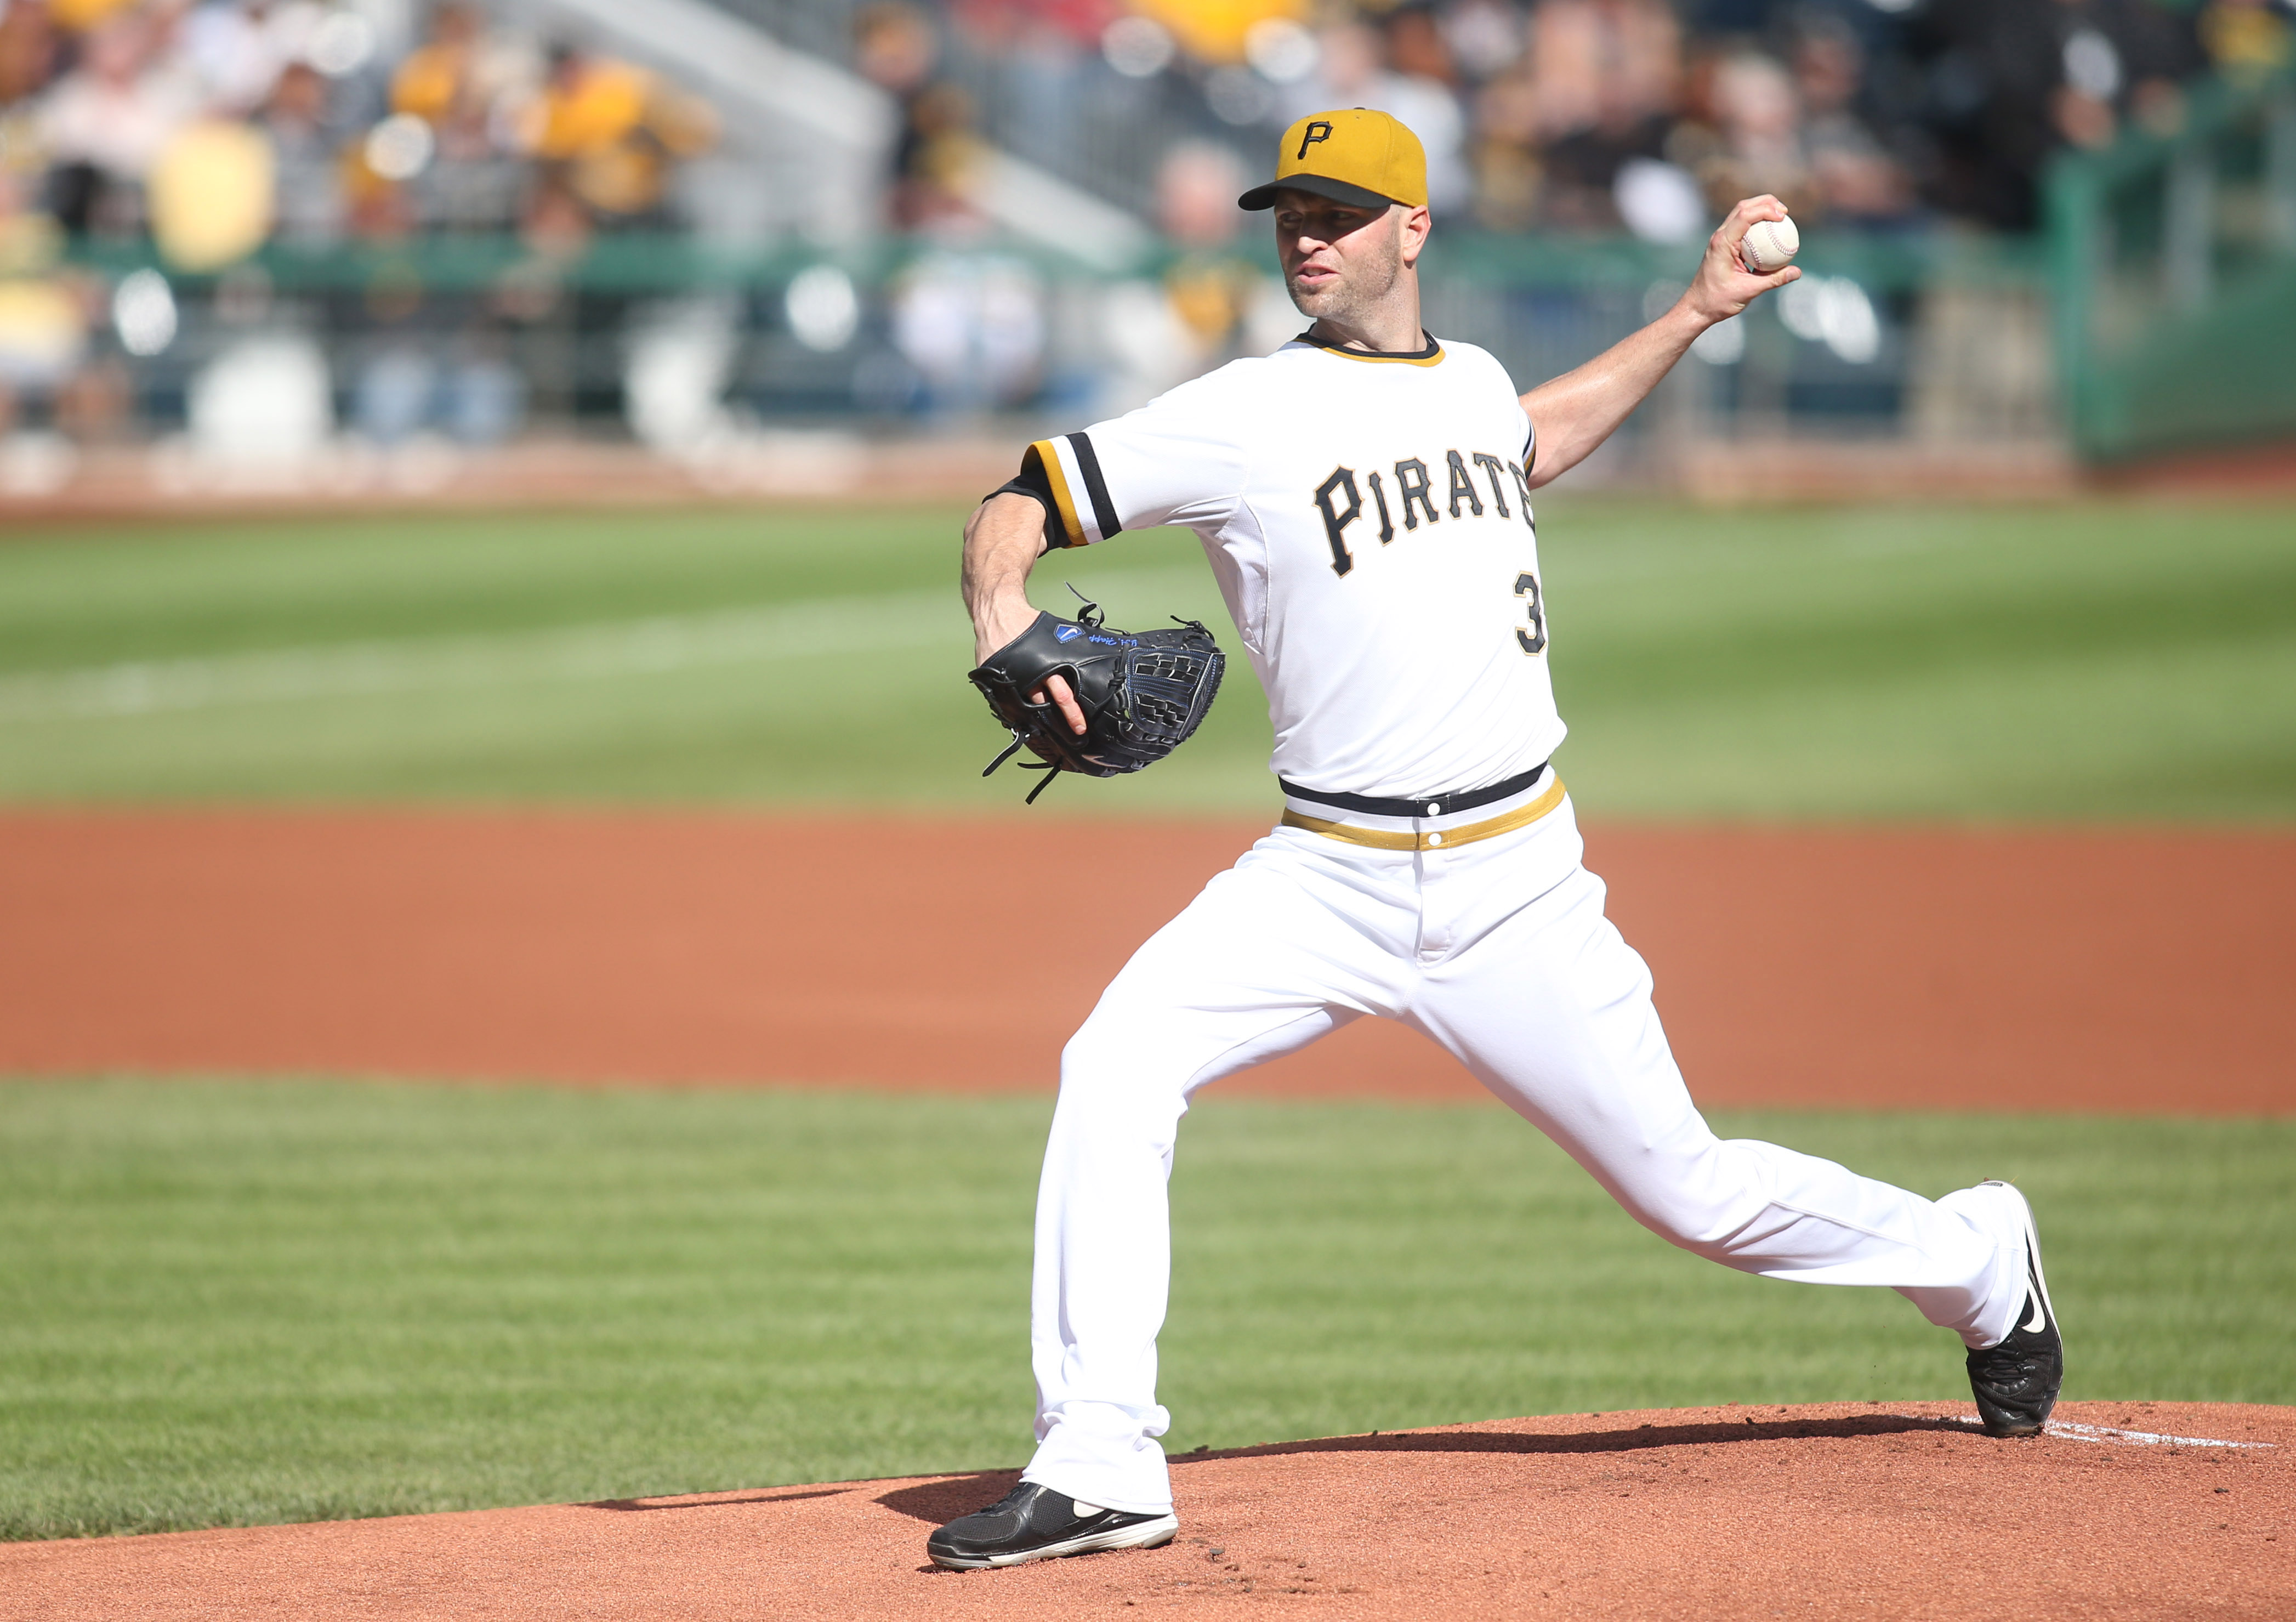 J.A. Happ's sudden improvements have been aided by the Pirates' famous pitching coach.